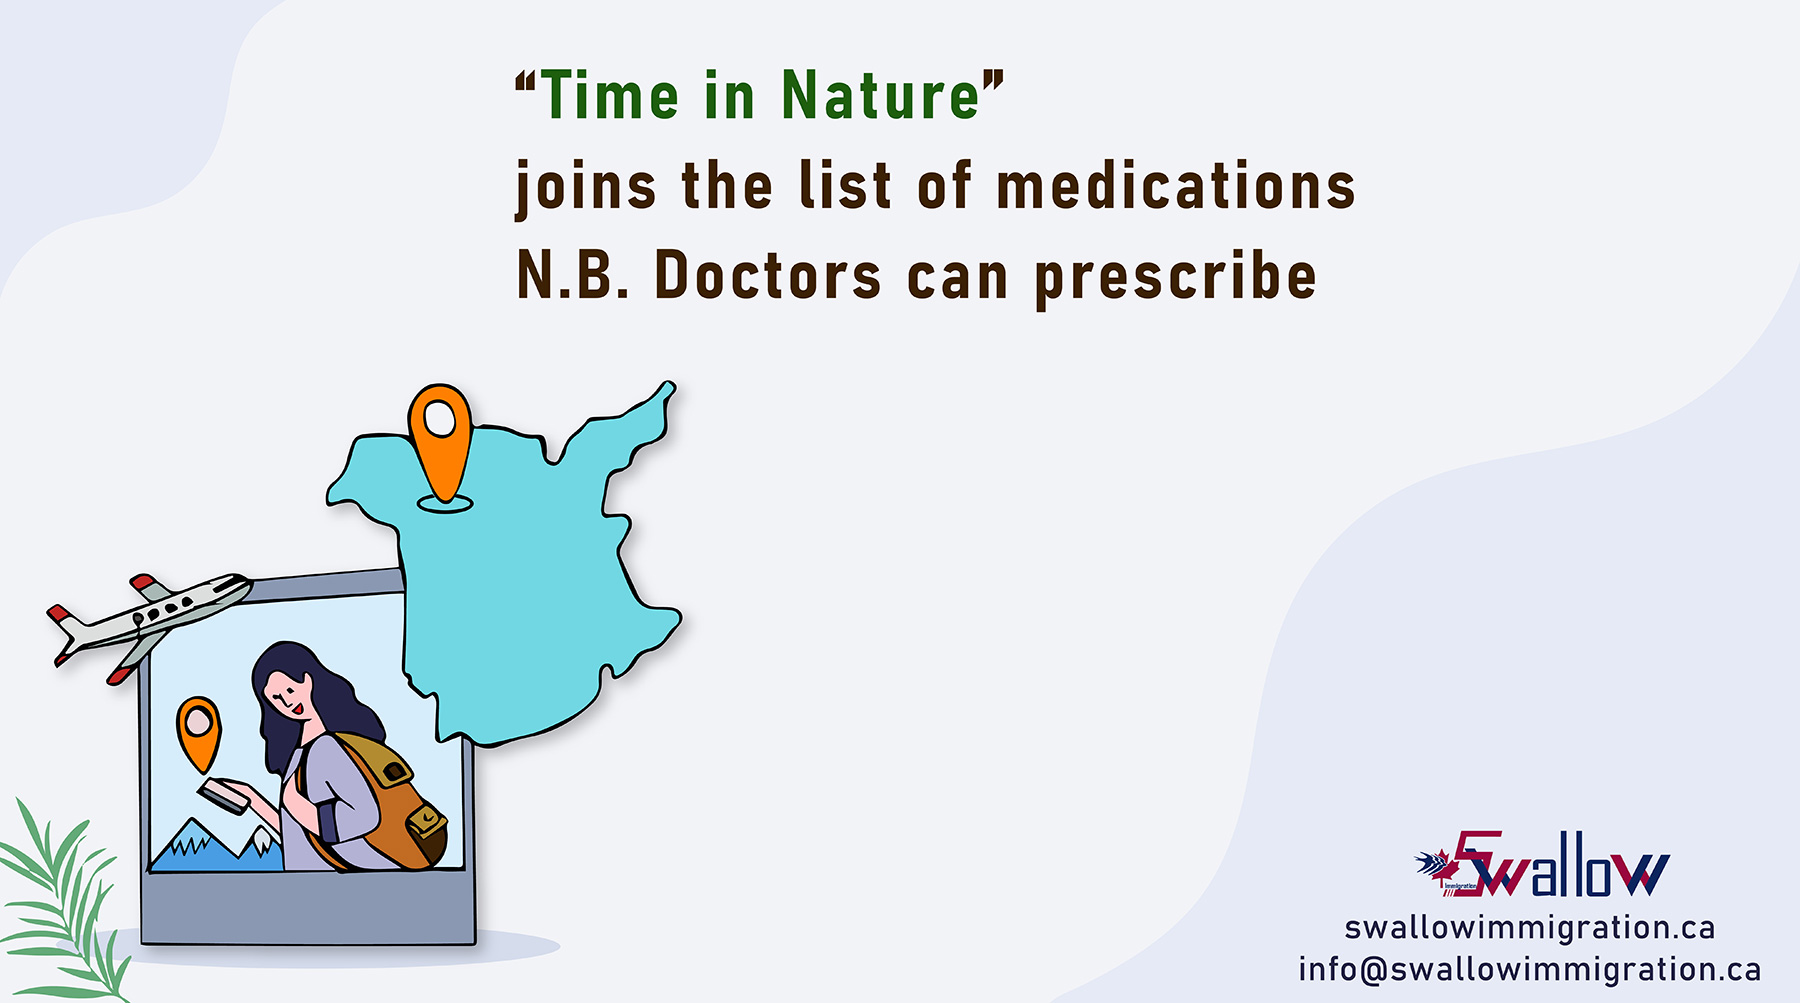 “Time in Nature” joins the list of medications N.B. Doctors can prescribe